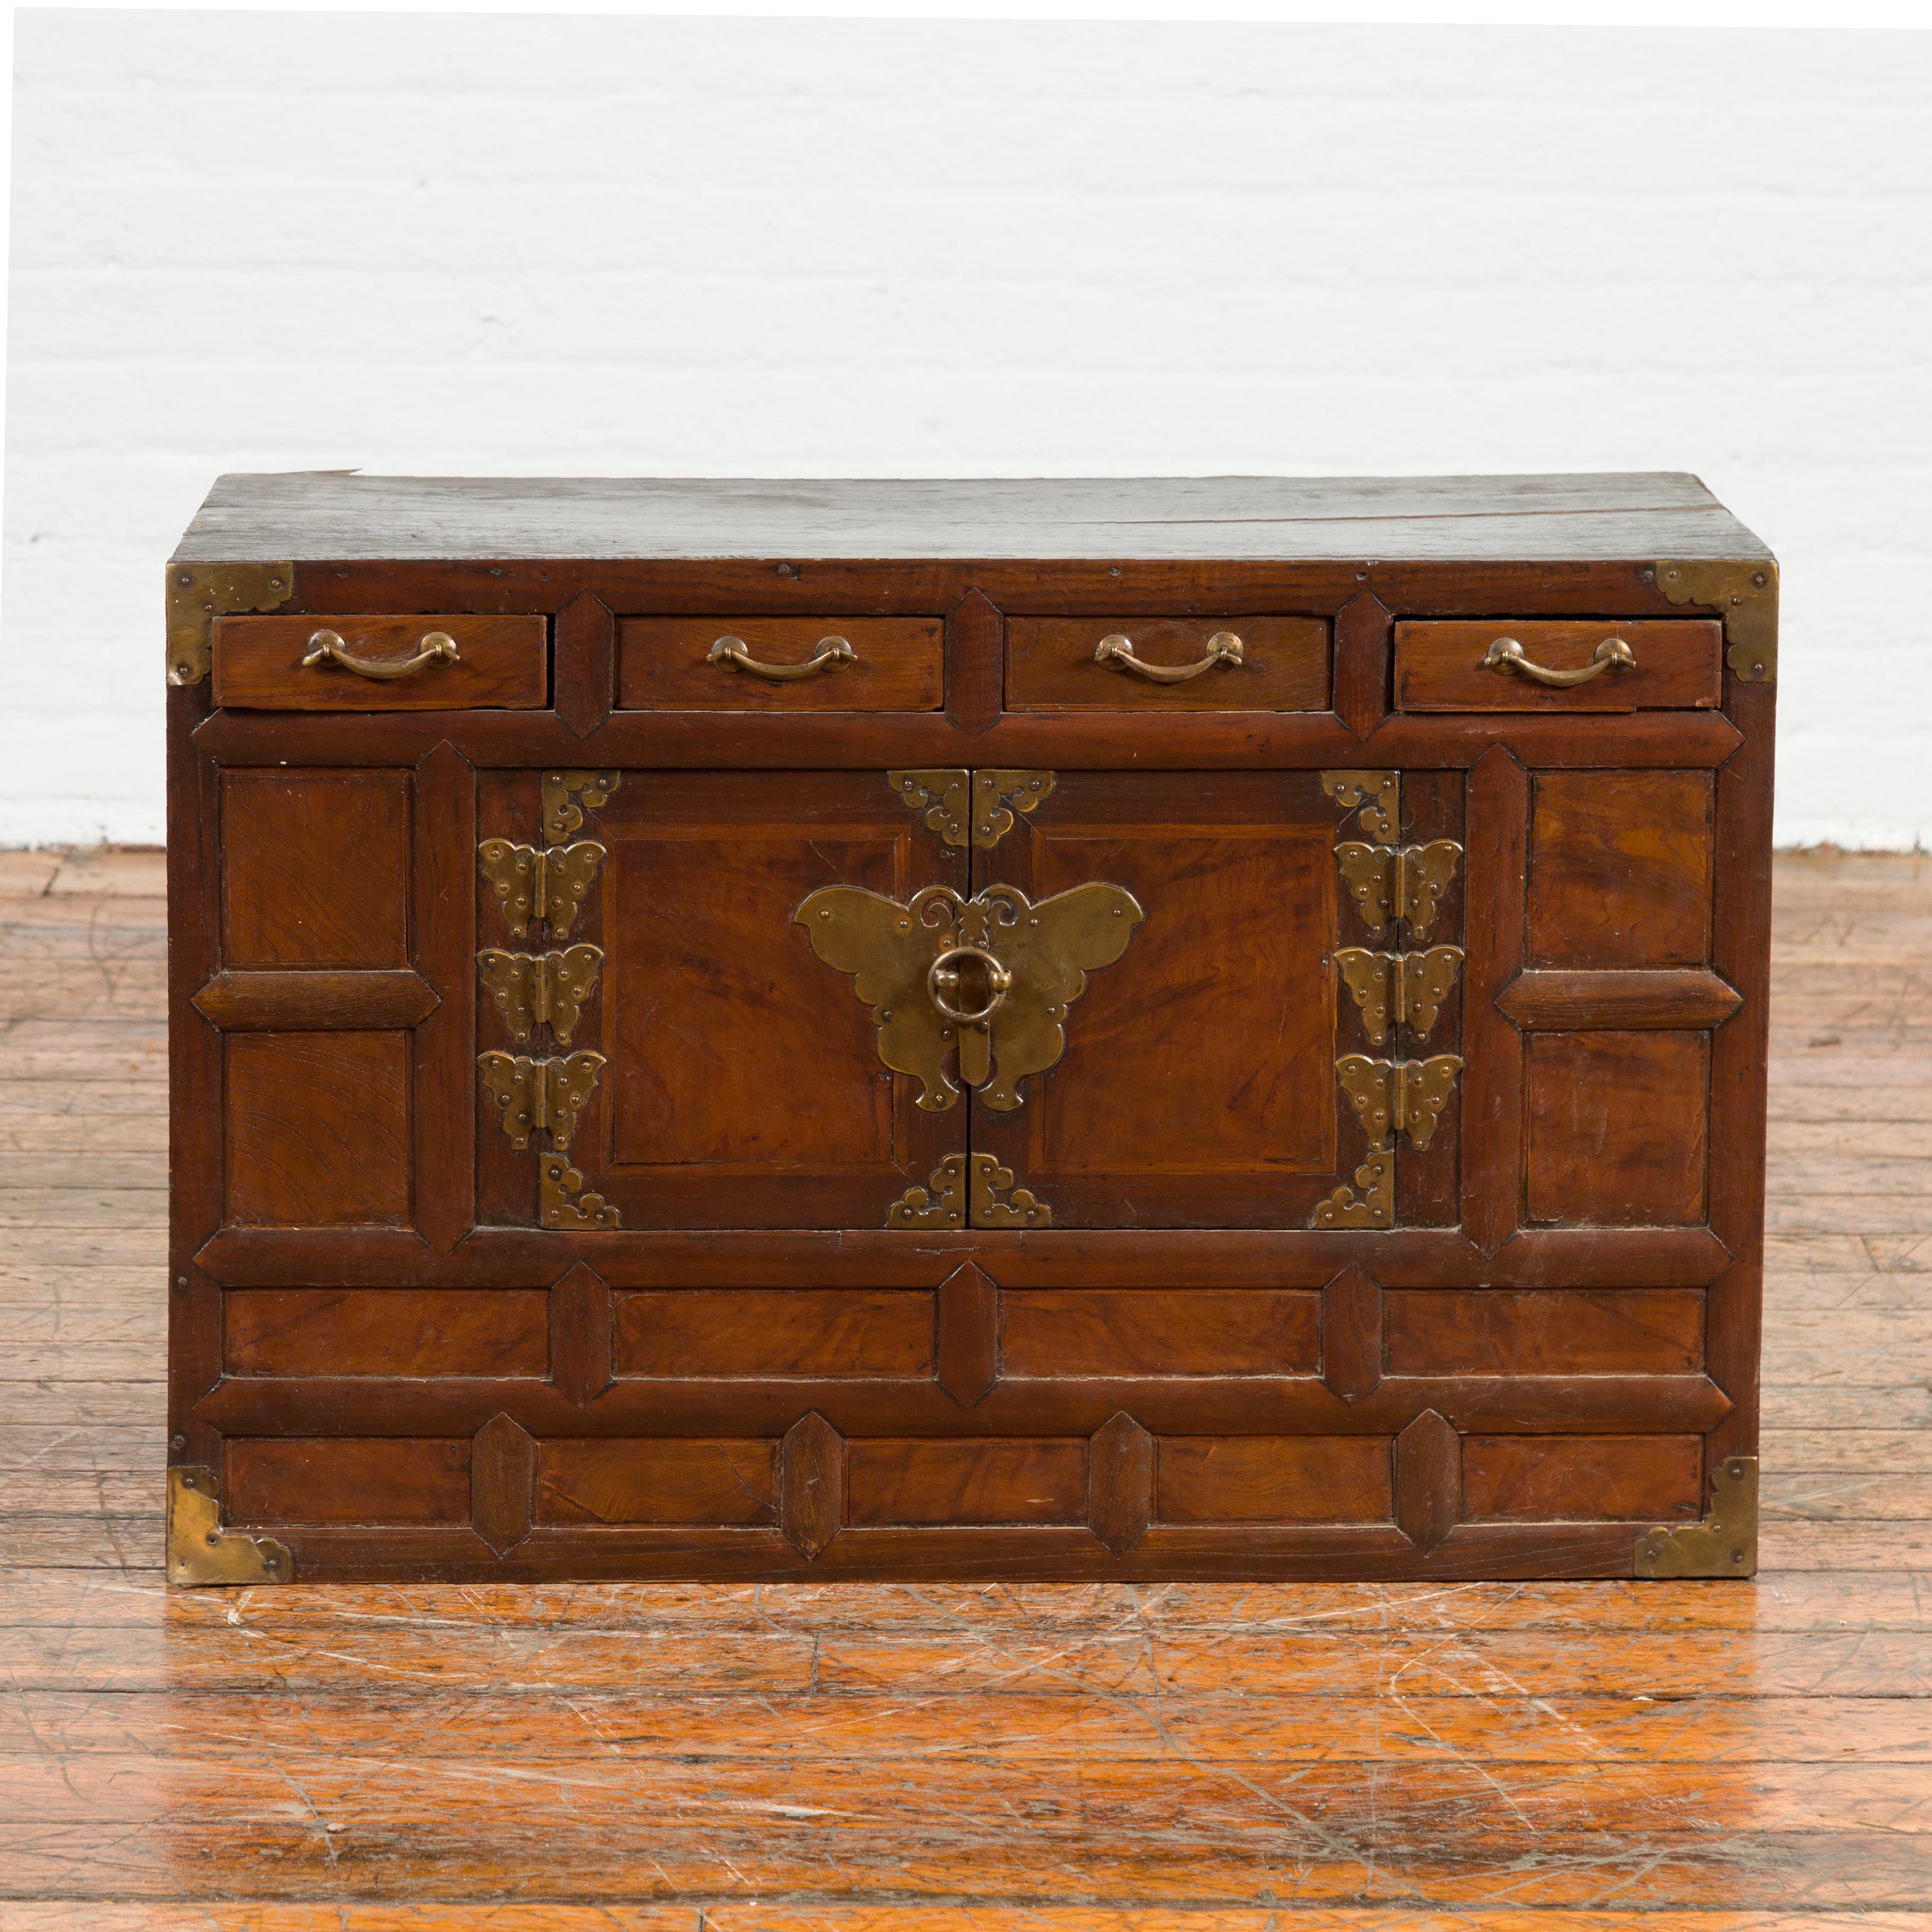 A Korean antique side chest from the early 20th century, with brass butterfly hardware, petite double doors and drawers. Created in Korea during the early years of the 20th century, this small cabinet features a rectangular top sitting above a